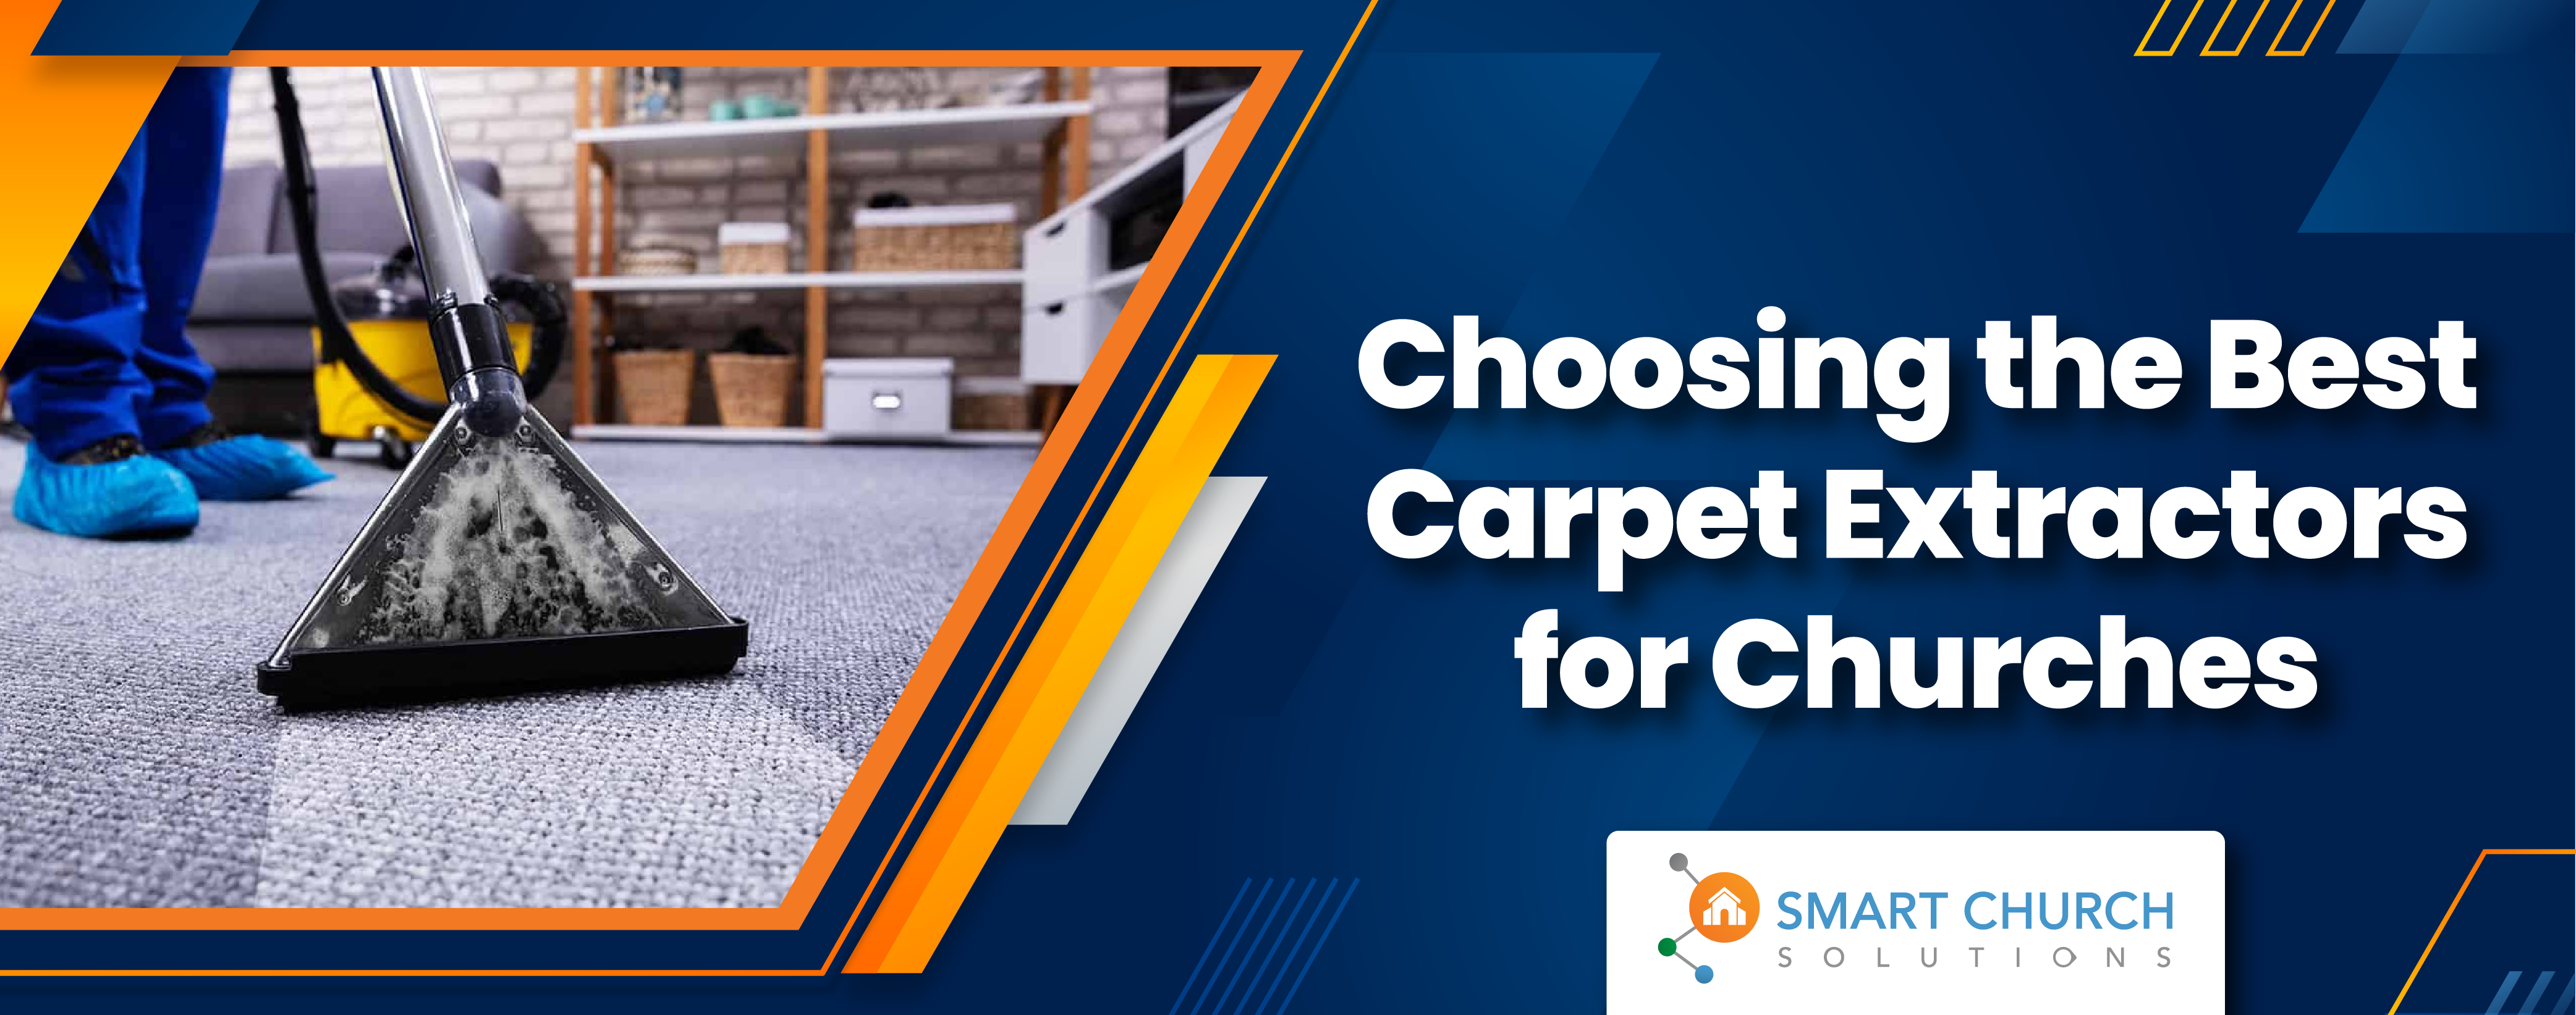 best carpet extractors for churches-02